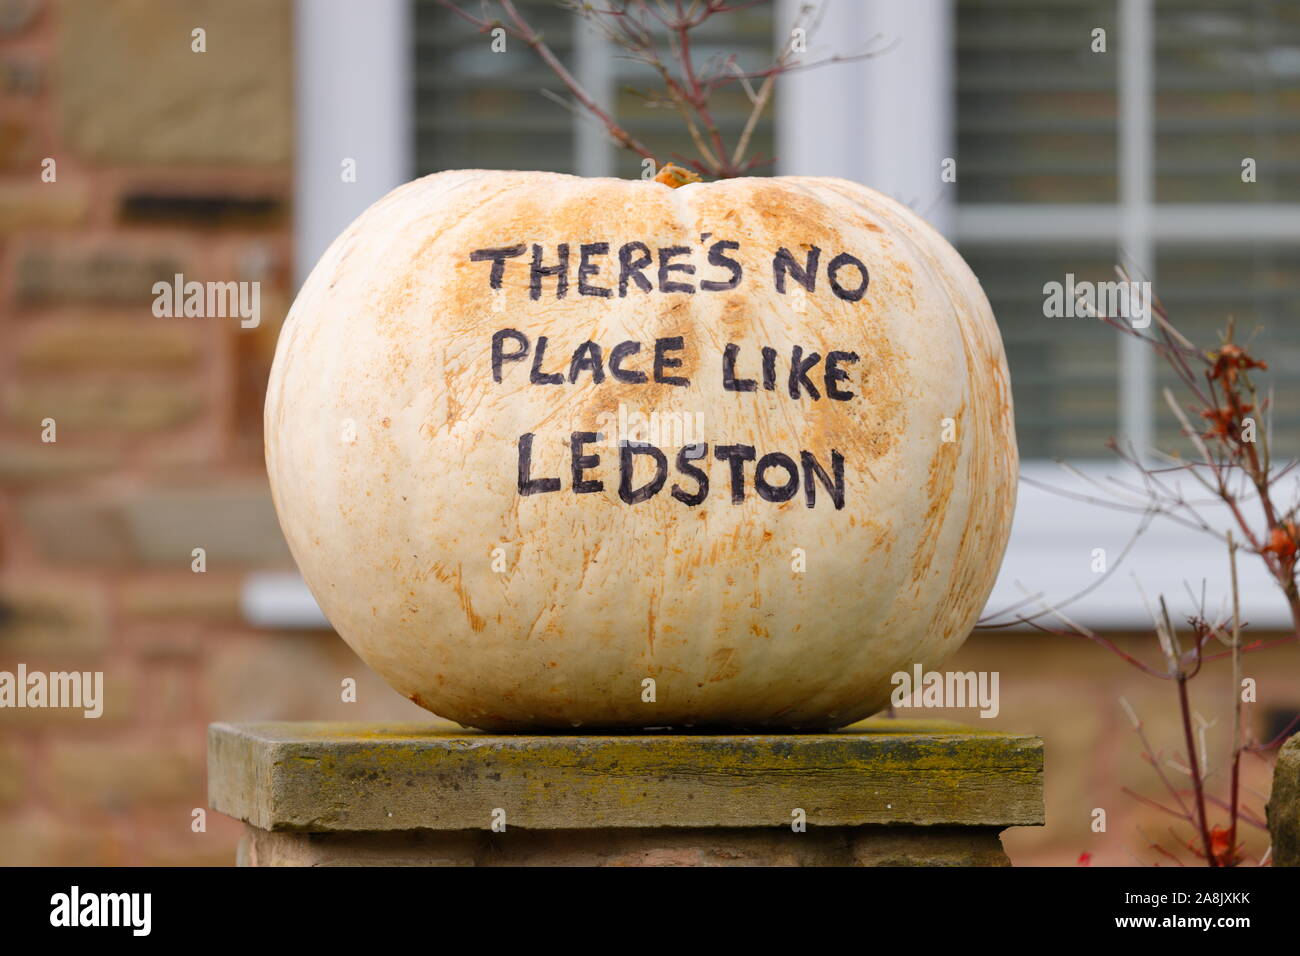 A pumkin on display in the village of Ledston which reads 'There's No Place Like Ledston' Stock Photo